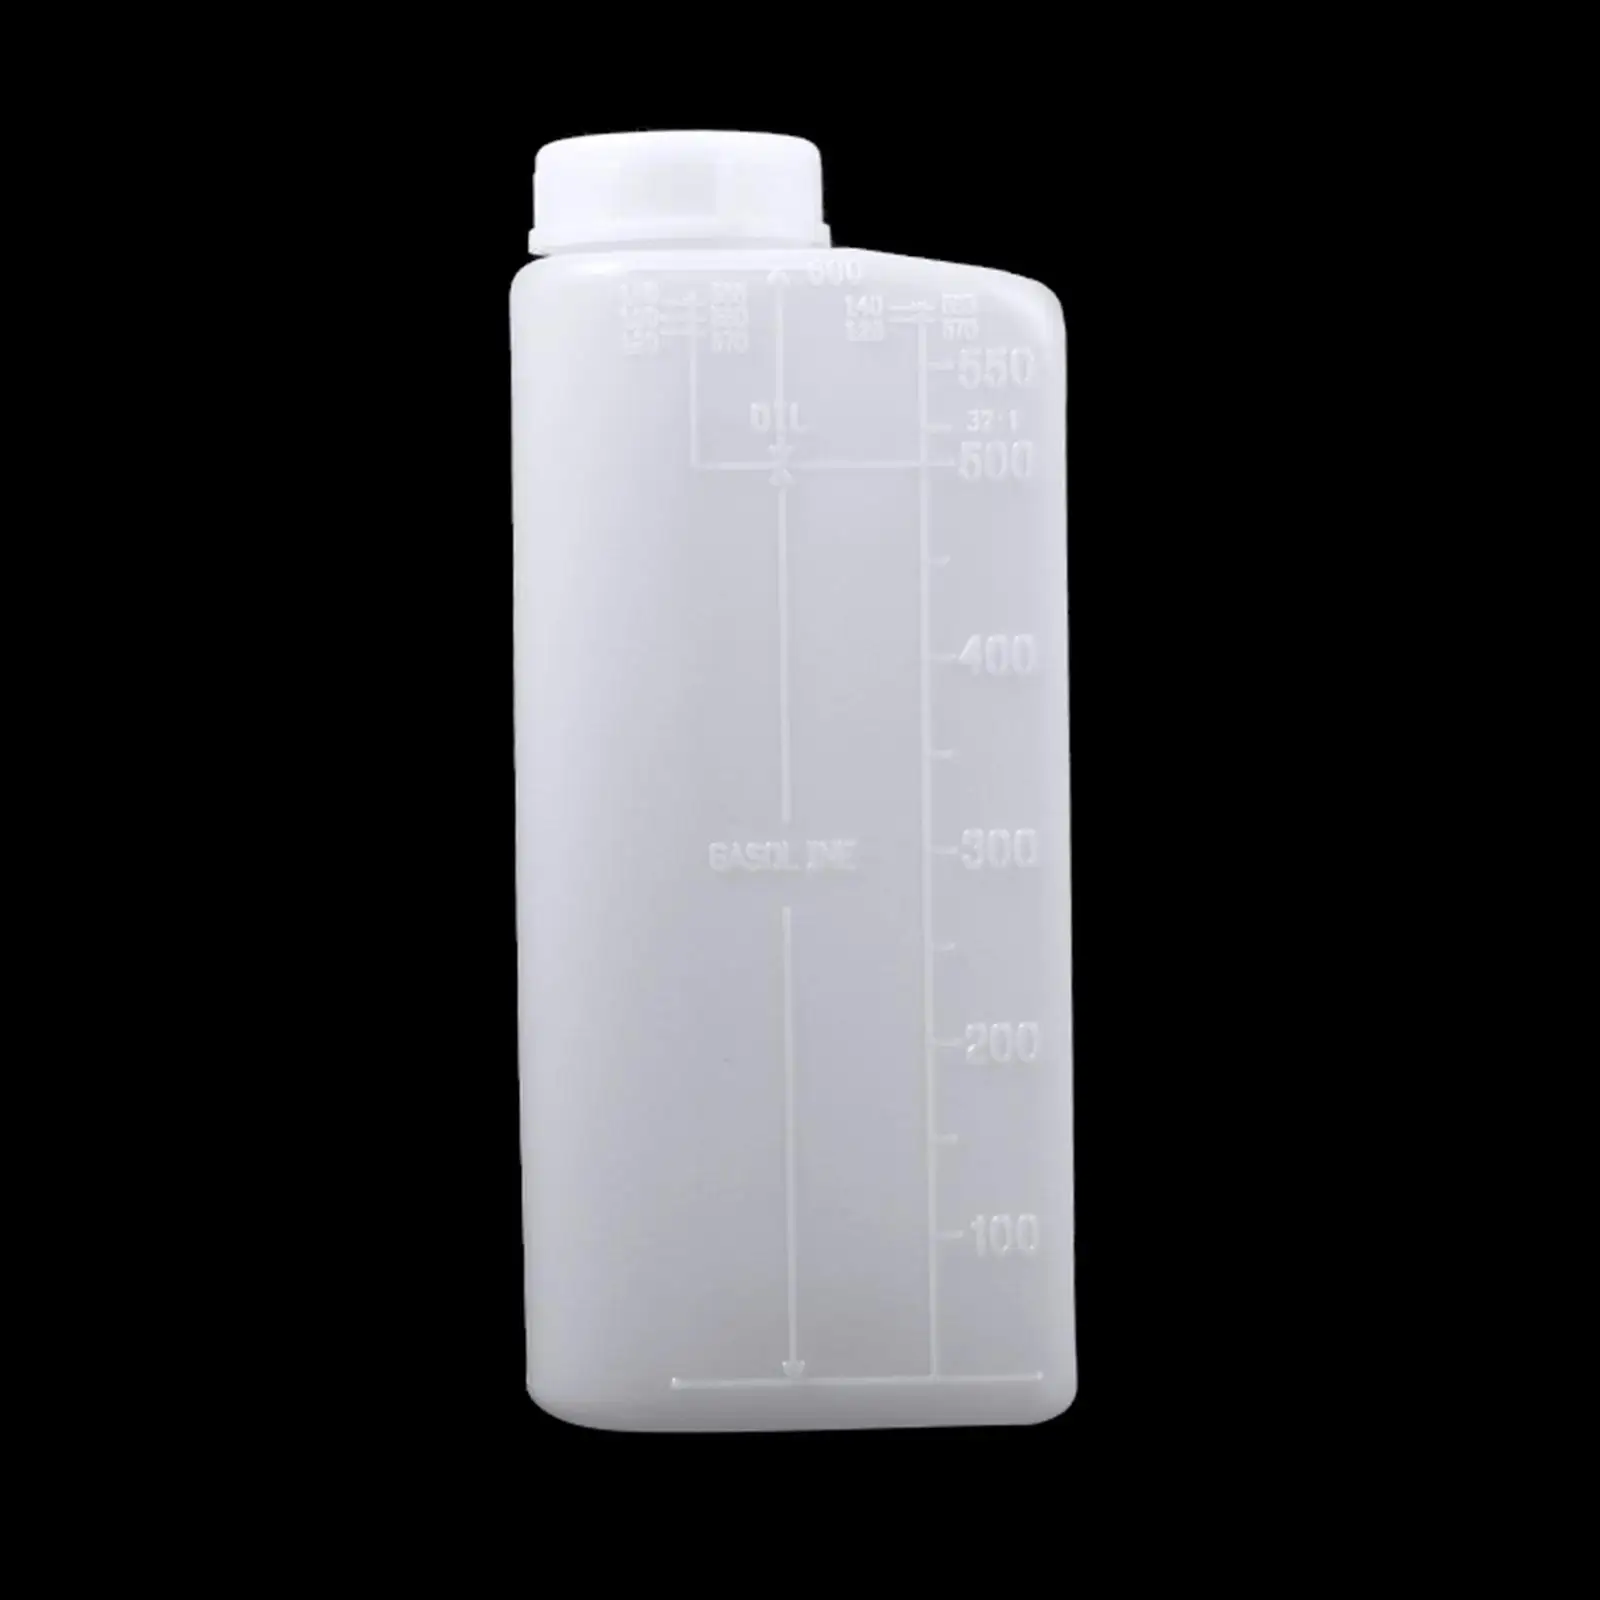 600ml Fuel Mixing Bottle Portable Small 2-Stroke Petrol Bottle for Lawn Trimmer Kitchen Gadget Accessory Tool